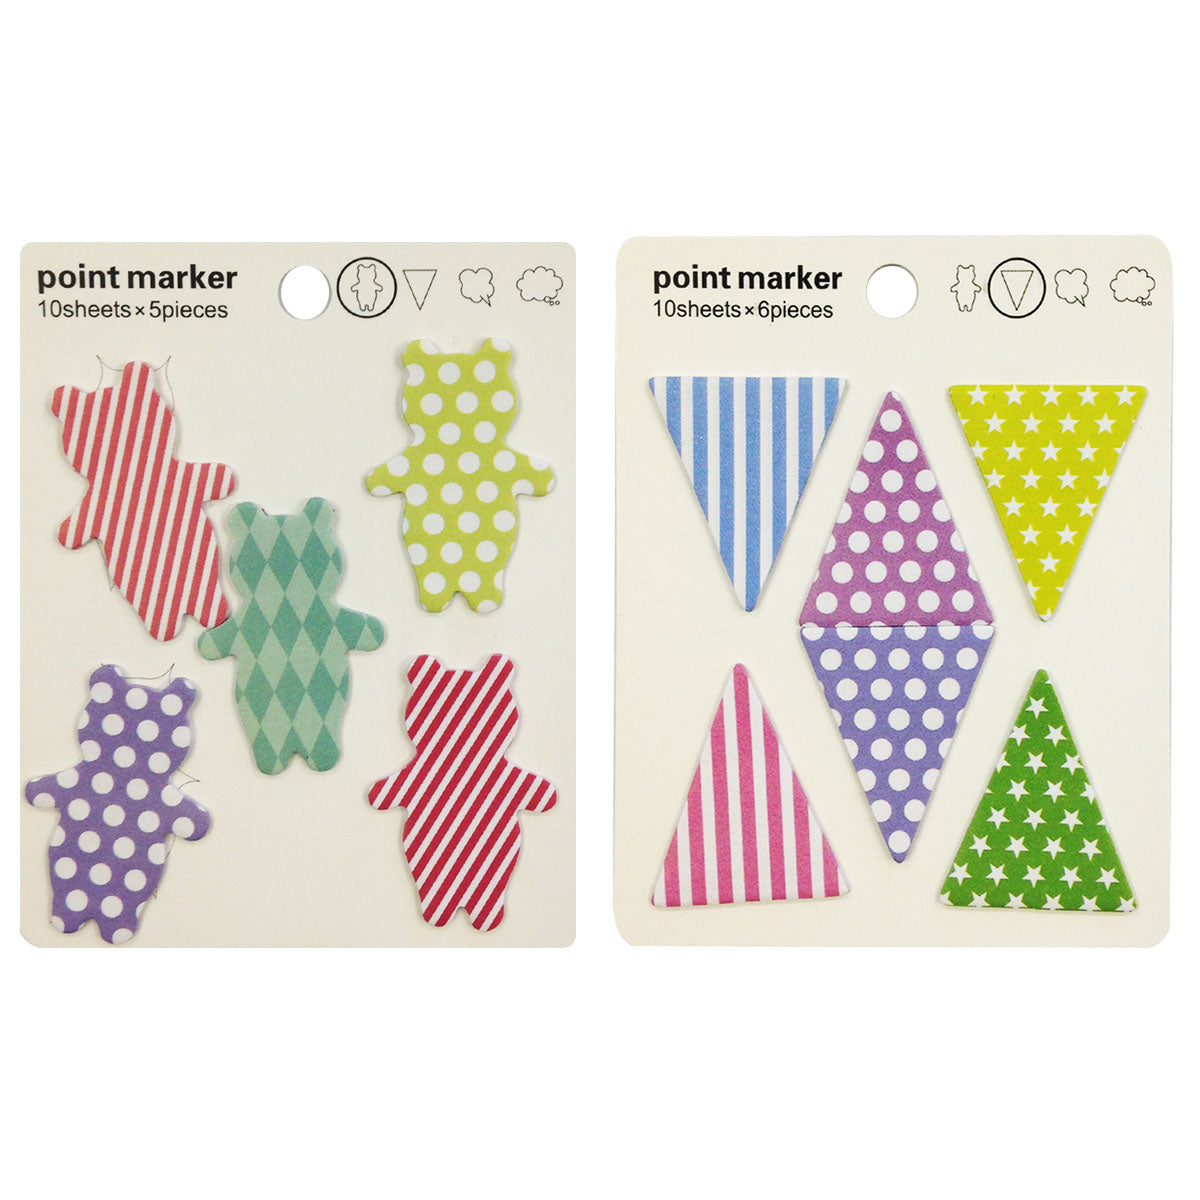 Wrapables Sticky Notes, Set of 2 (Dancing Bears,Groovy Triangles)